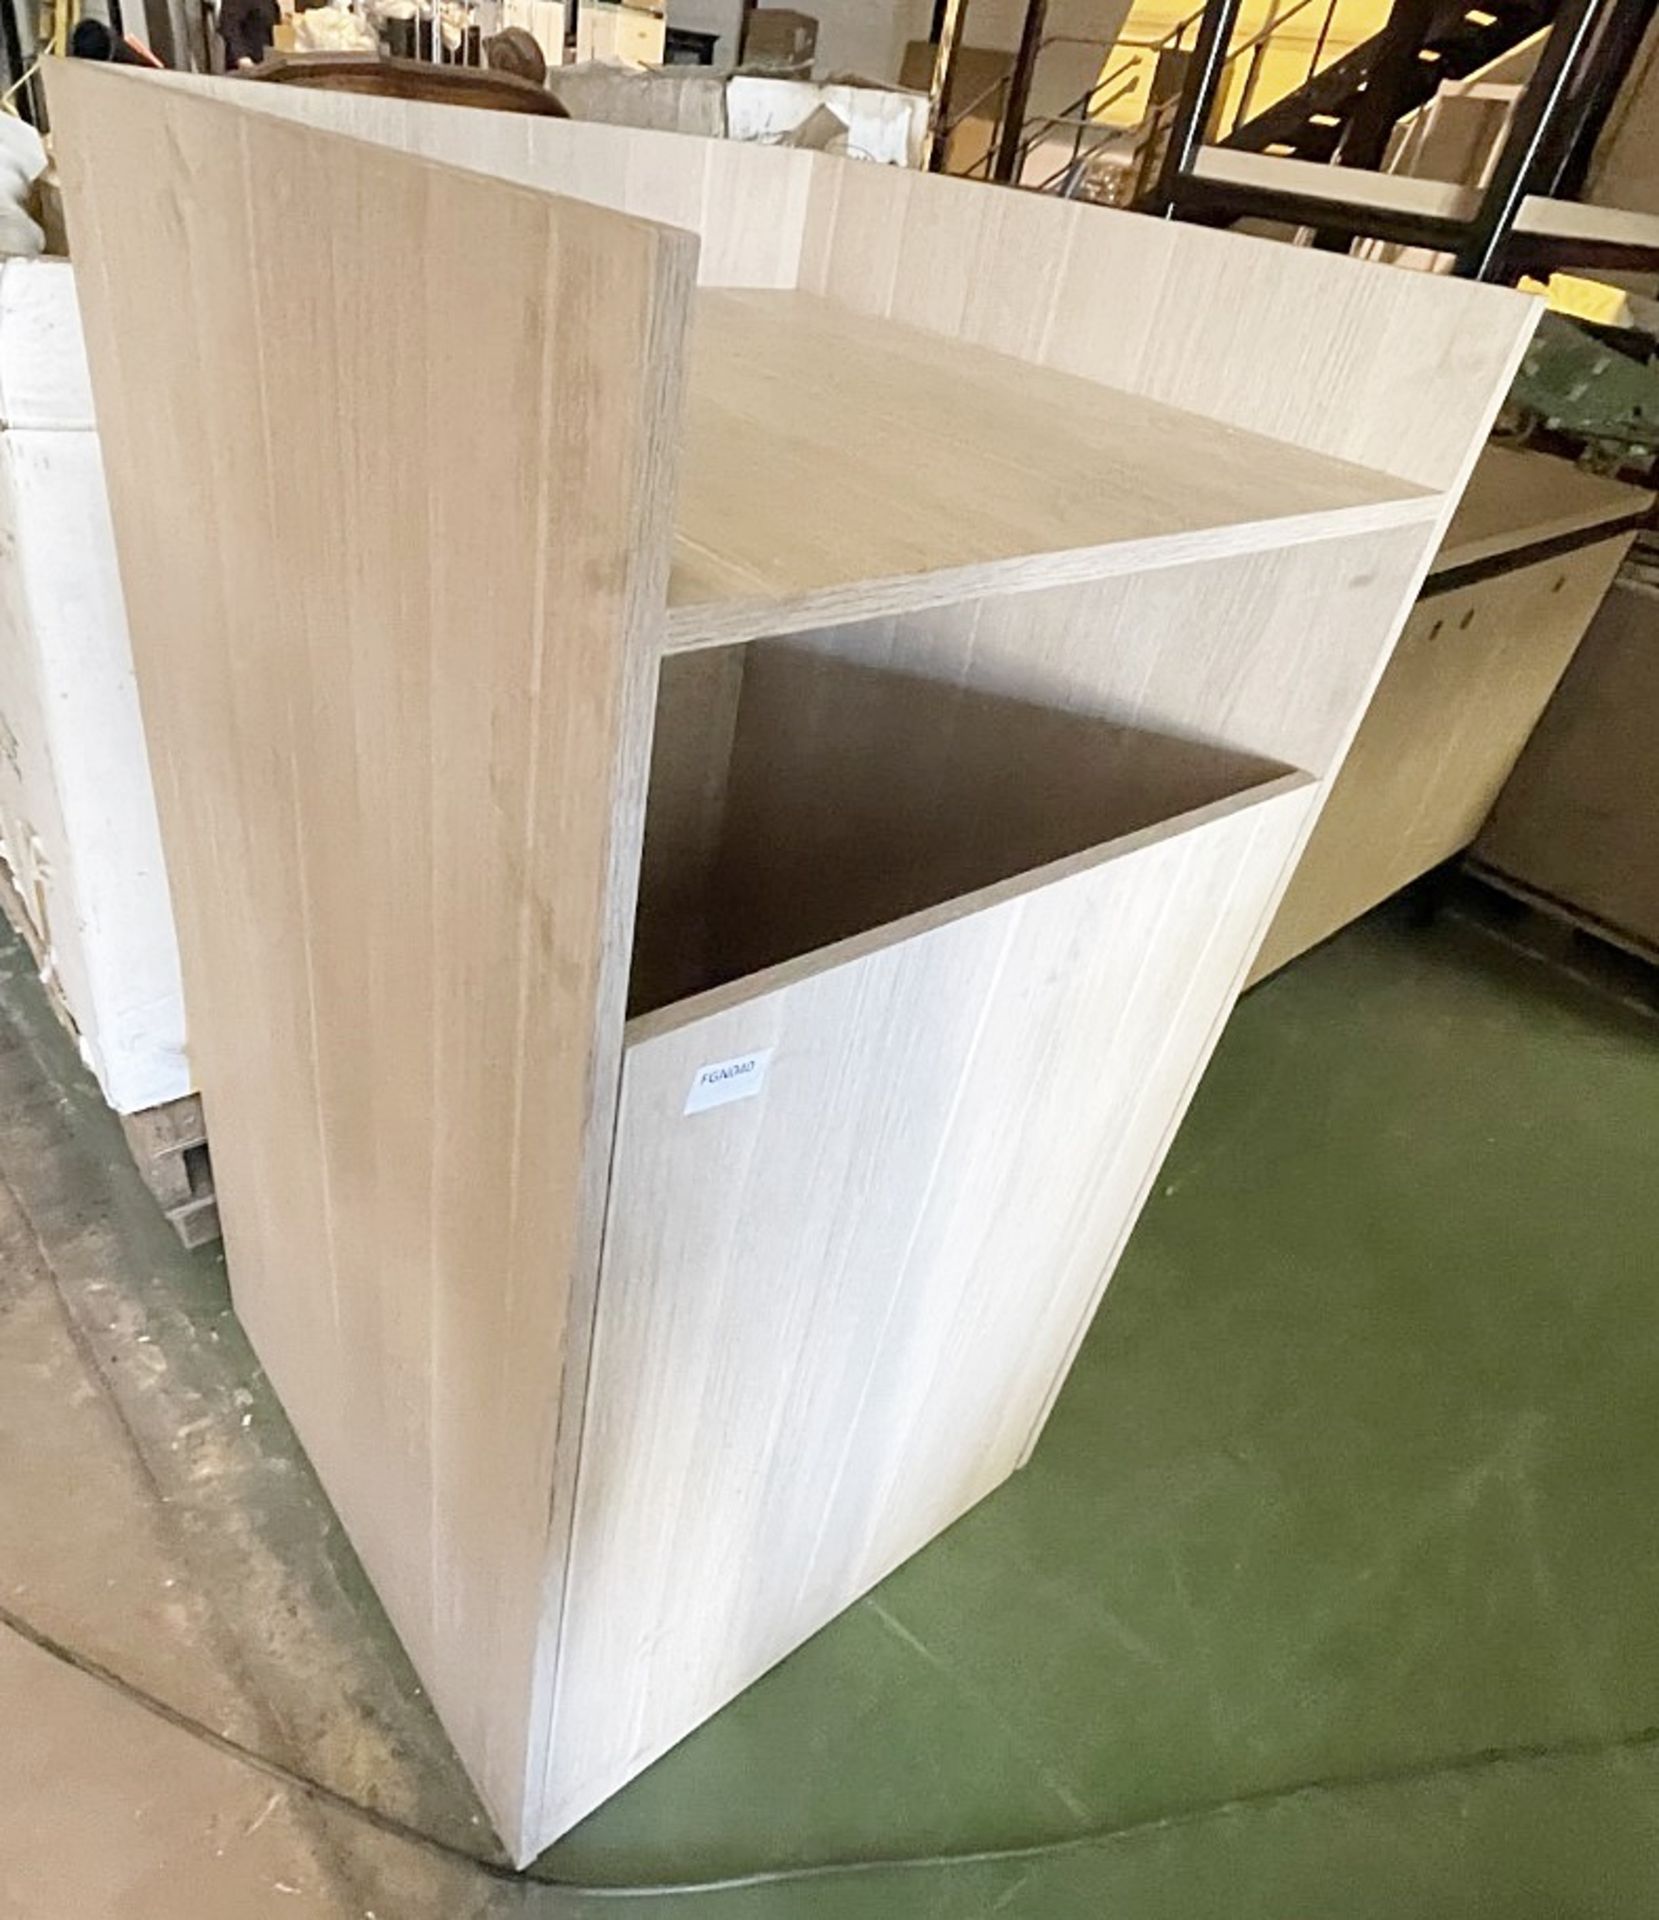 1 x Timber Bin Store And Counter For Restaurant - Approx 68x70x127cm - Ref: FGN040 - CL834 - - Image 5 of 5